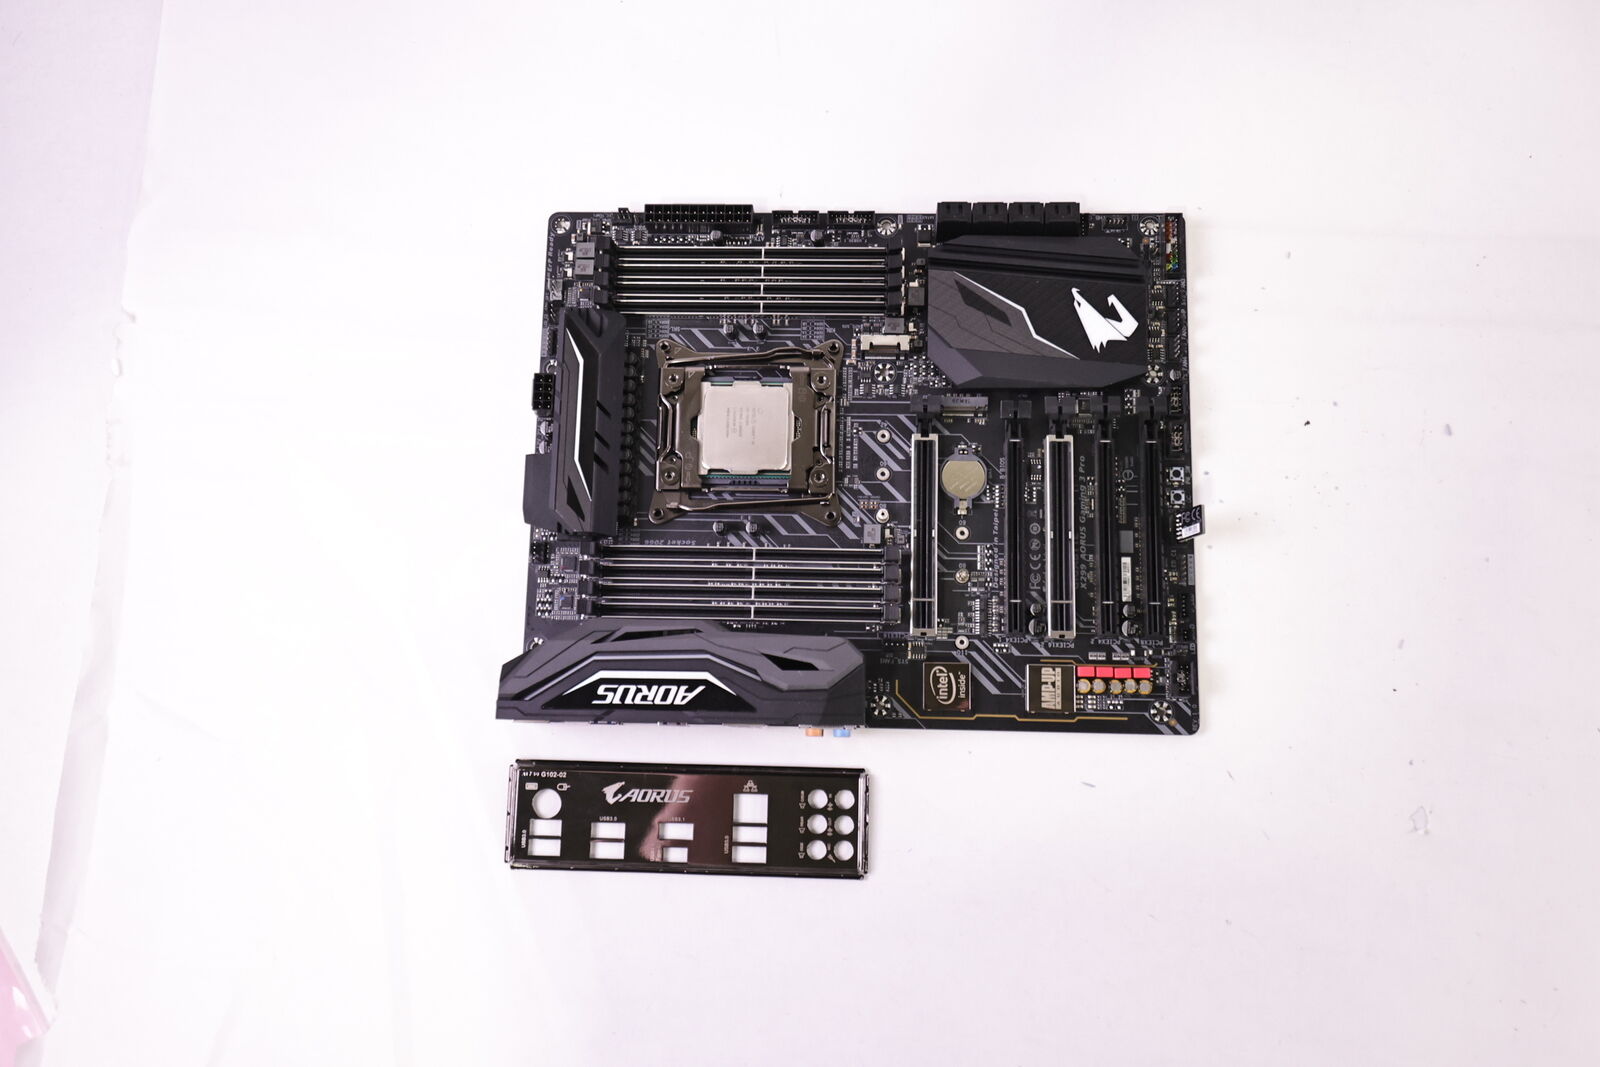 GIGABYTE X299 AORUS GAMING 3 PRO MOTHERBOARD WITH INTEL CORE I9-7920X PROCESSOR